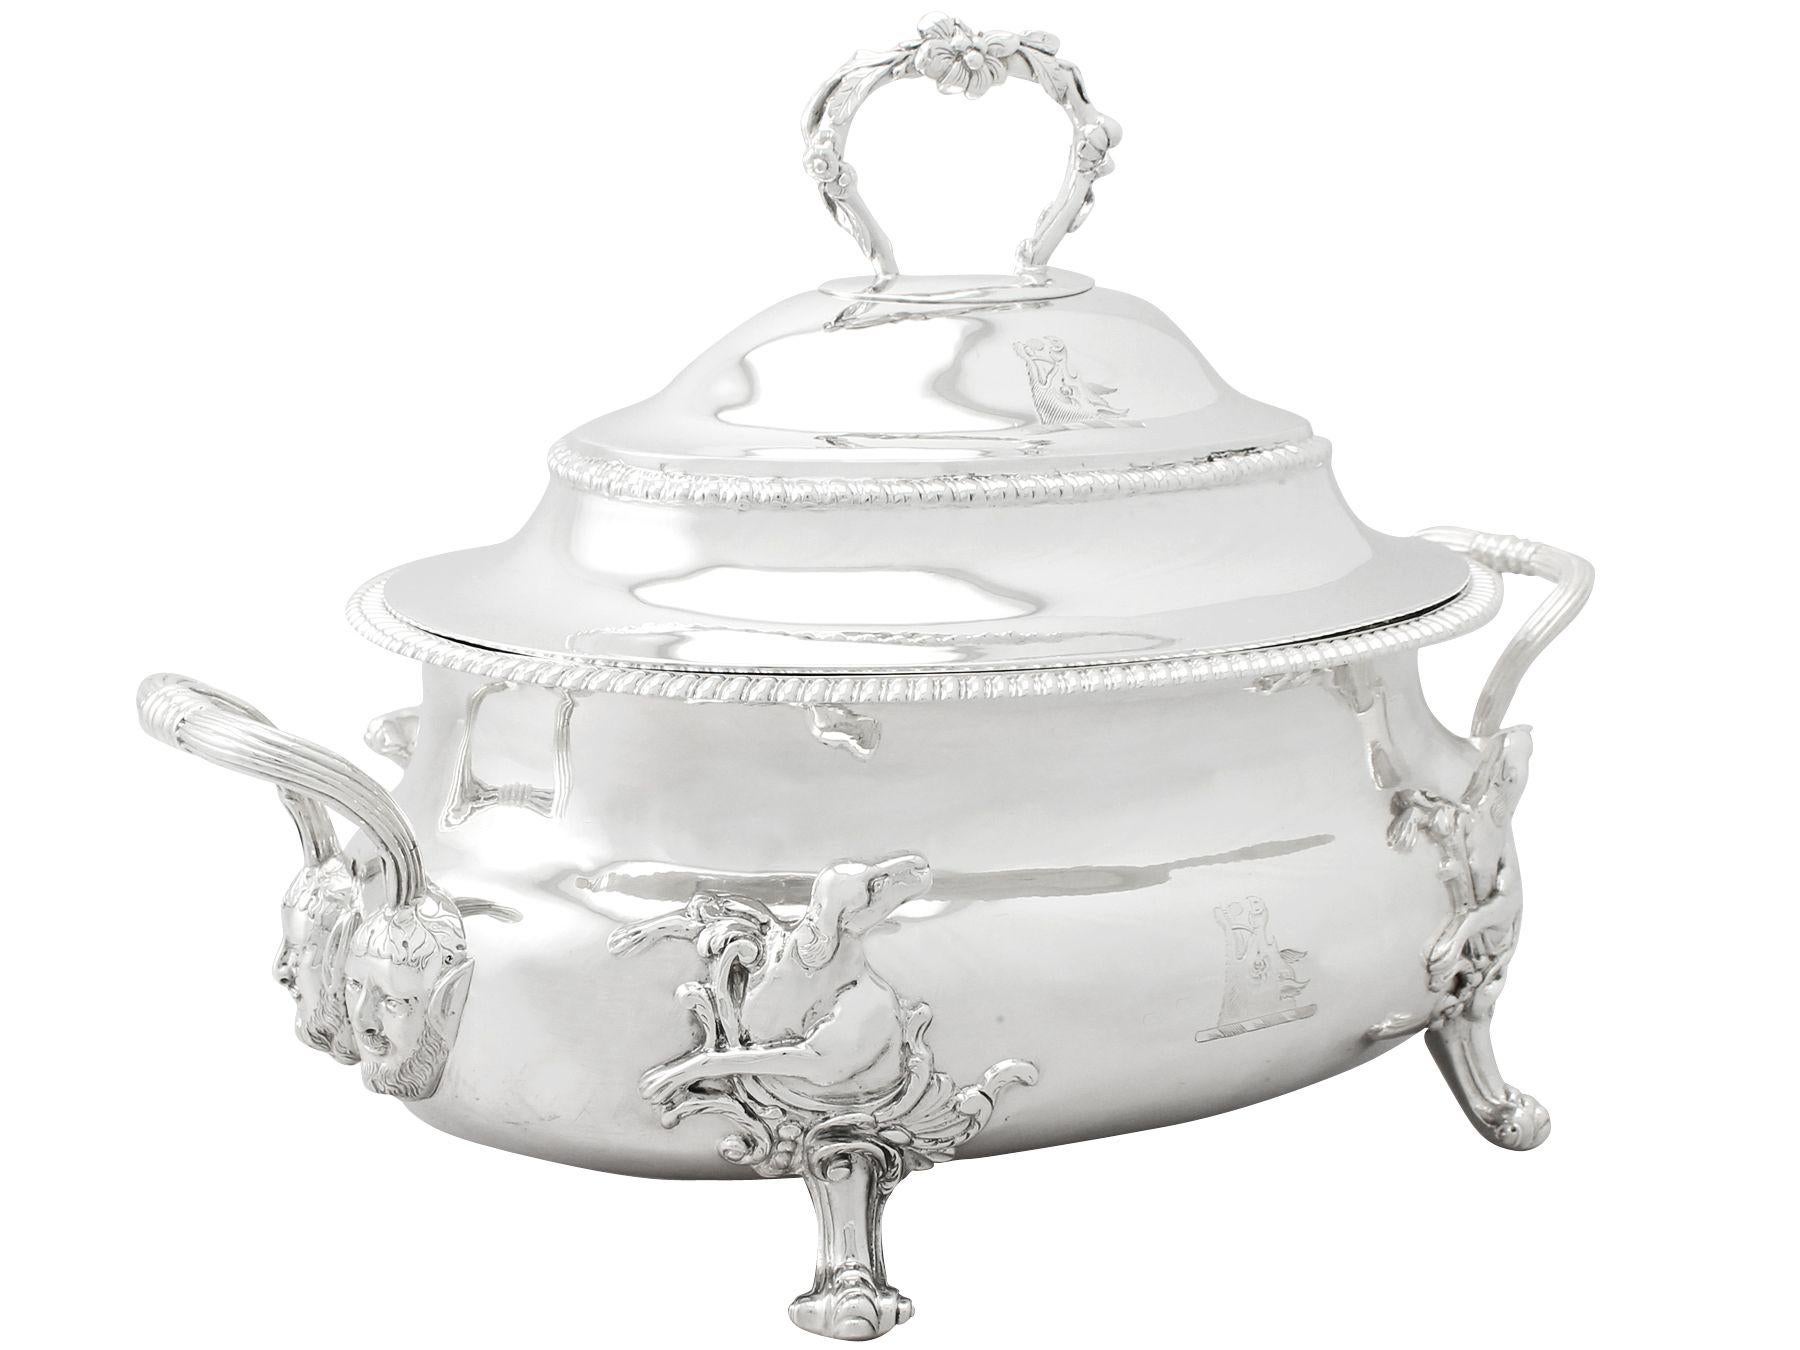 An exceptional, fine and impressive antique Georgian English sterling silver soup tureen; an addition to our dining silverware collection.

This exceptional antique George III English sterling silver soup tureen has an oval rounded form.

The